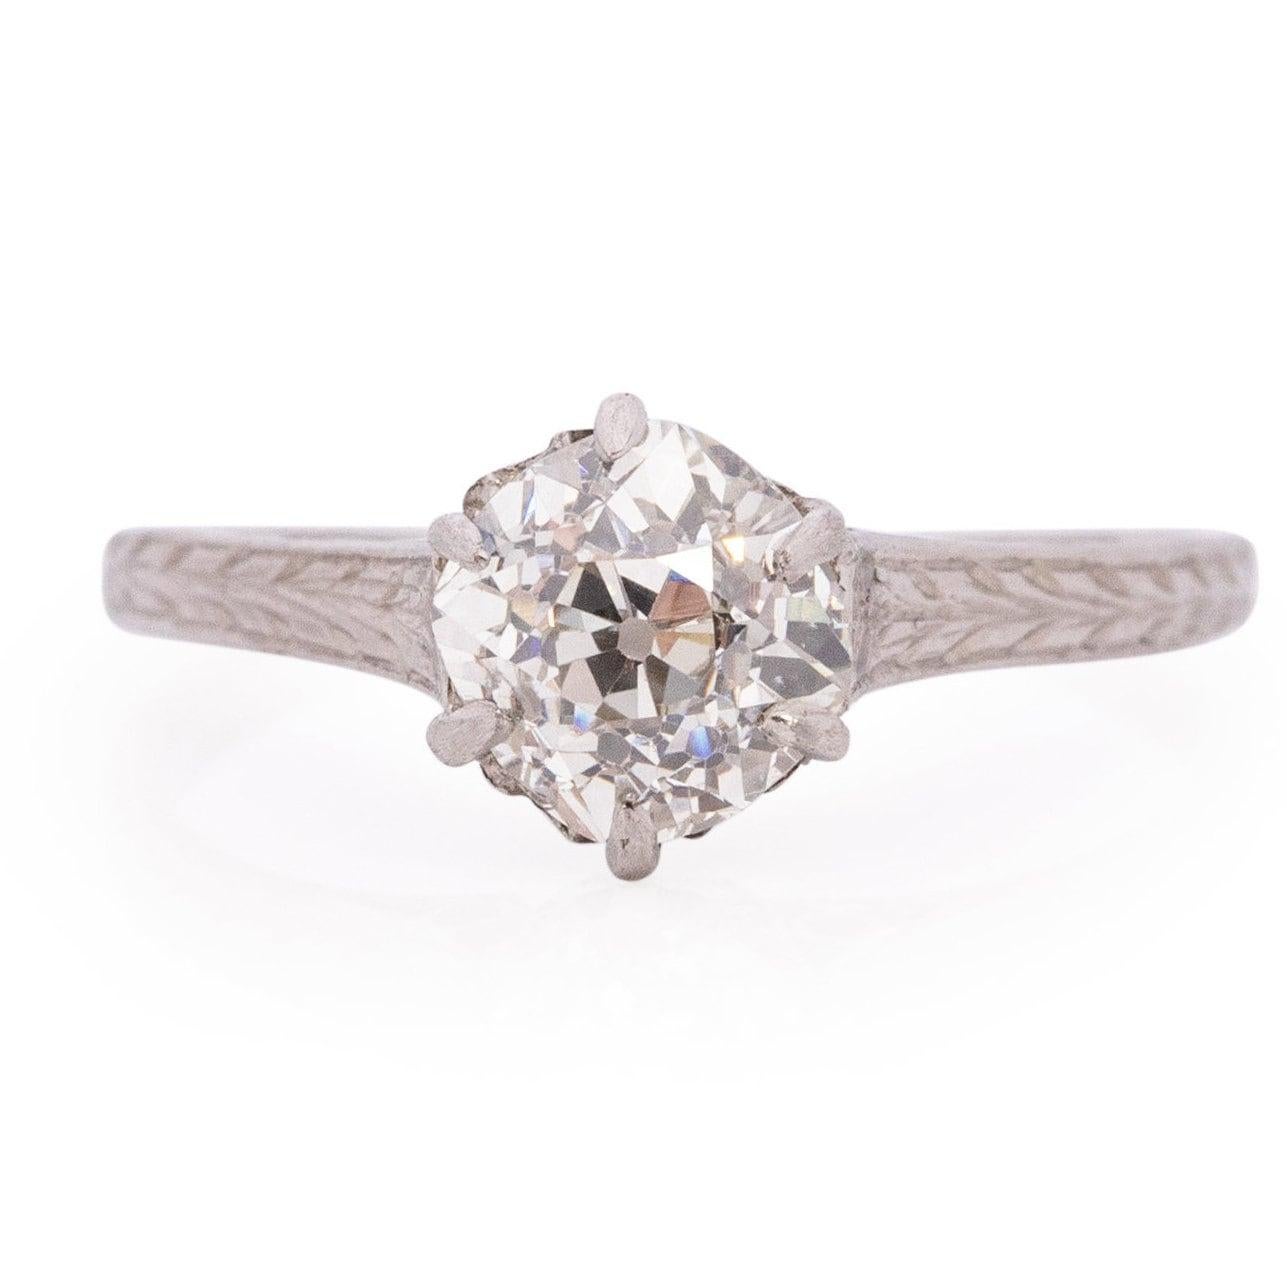 Presenting a gracefully understated Edwardian solitaire engagement ring. The centerpiece features an old European cut diamond cradled in a cathedral setting. Enchanting openwork graces the gallery, encircled by cathedral shanks adorned with a clean